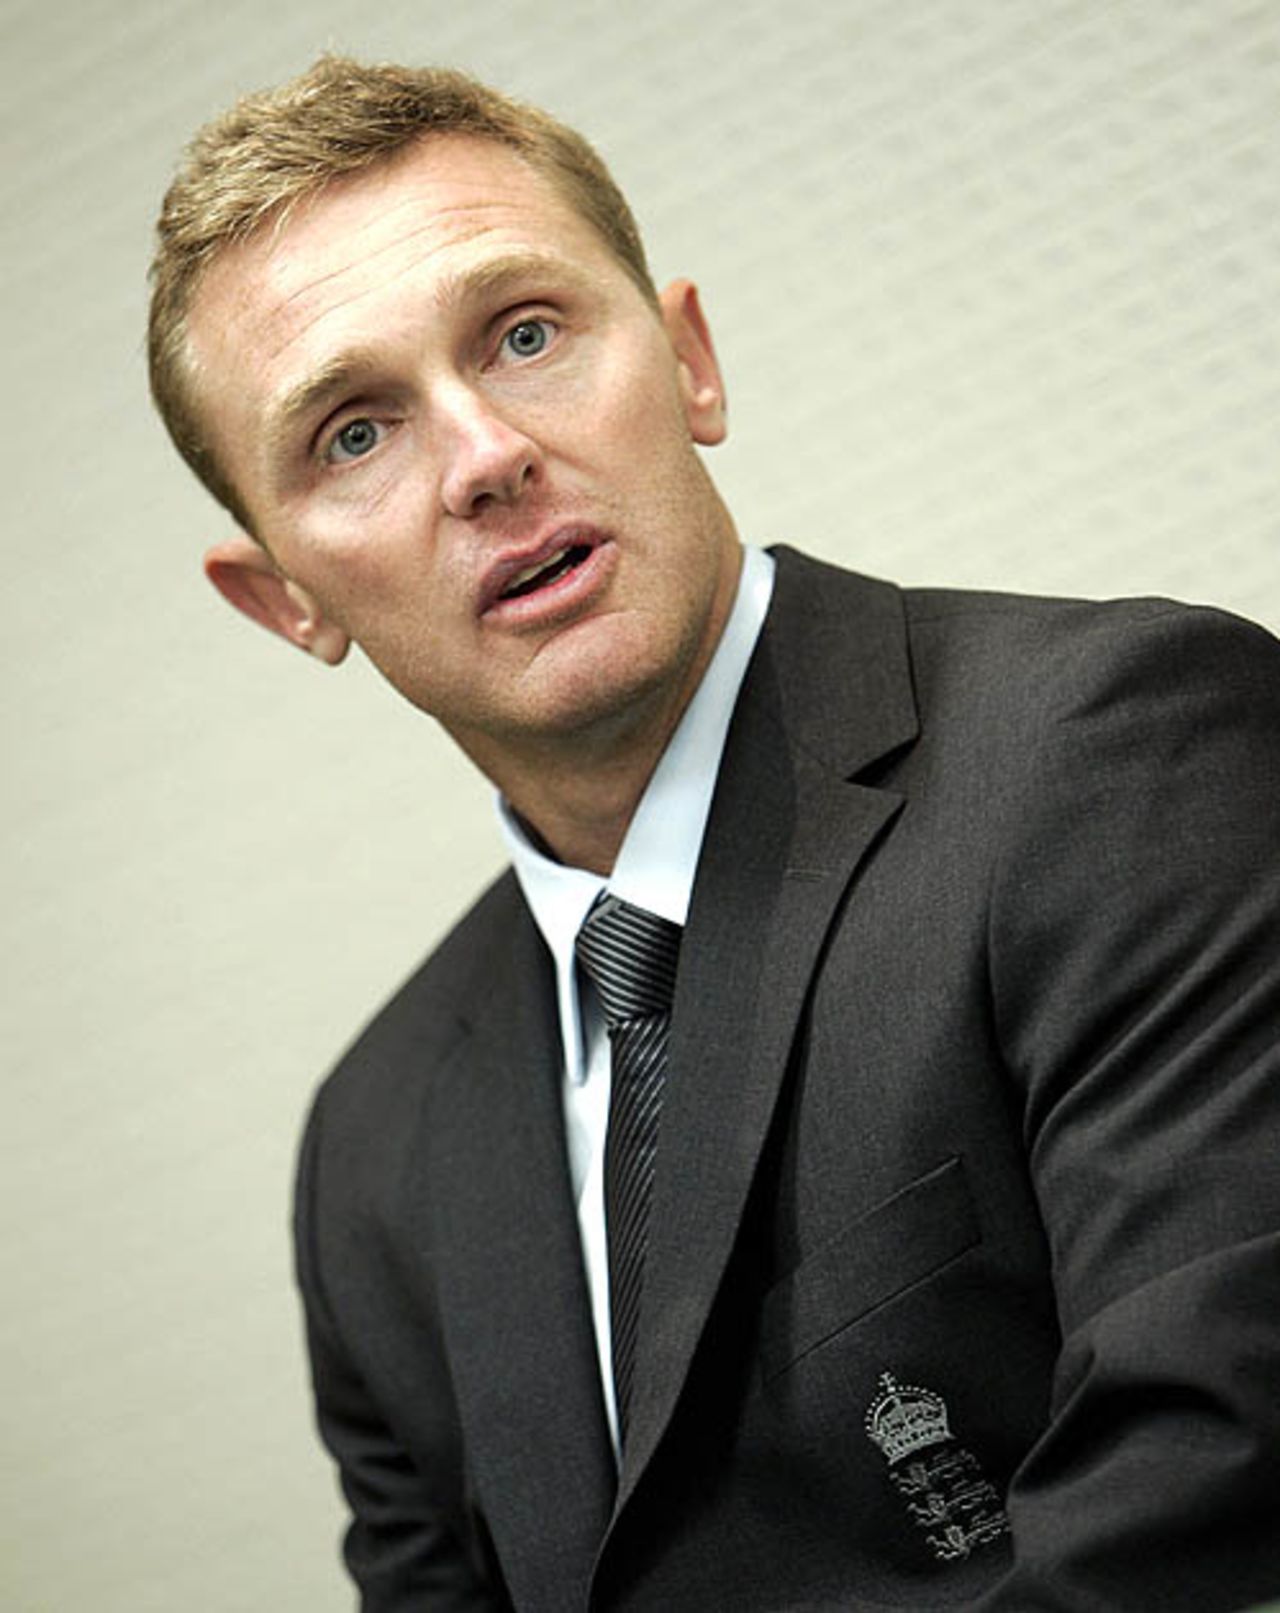 Darren Maddy at a press conference, Cape Town, September 11, 2007